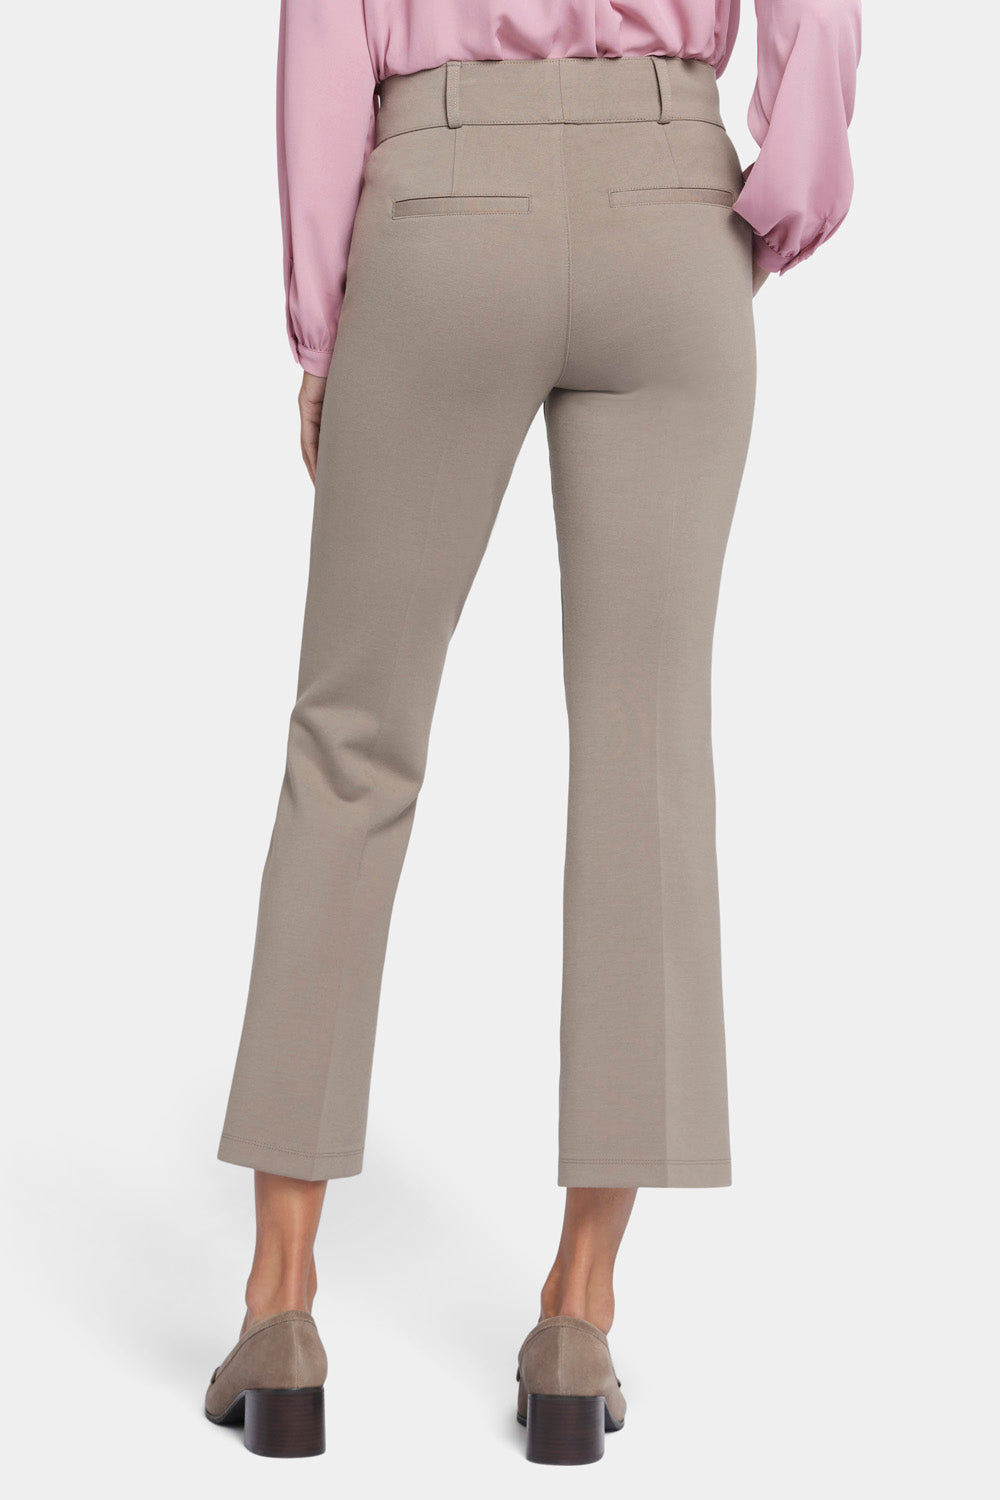 NYDJ Pull-On Flared Ankle Trouser Pants Sculpt-Her™ Collection - Saddlewood